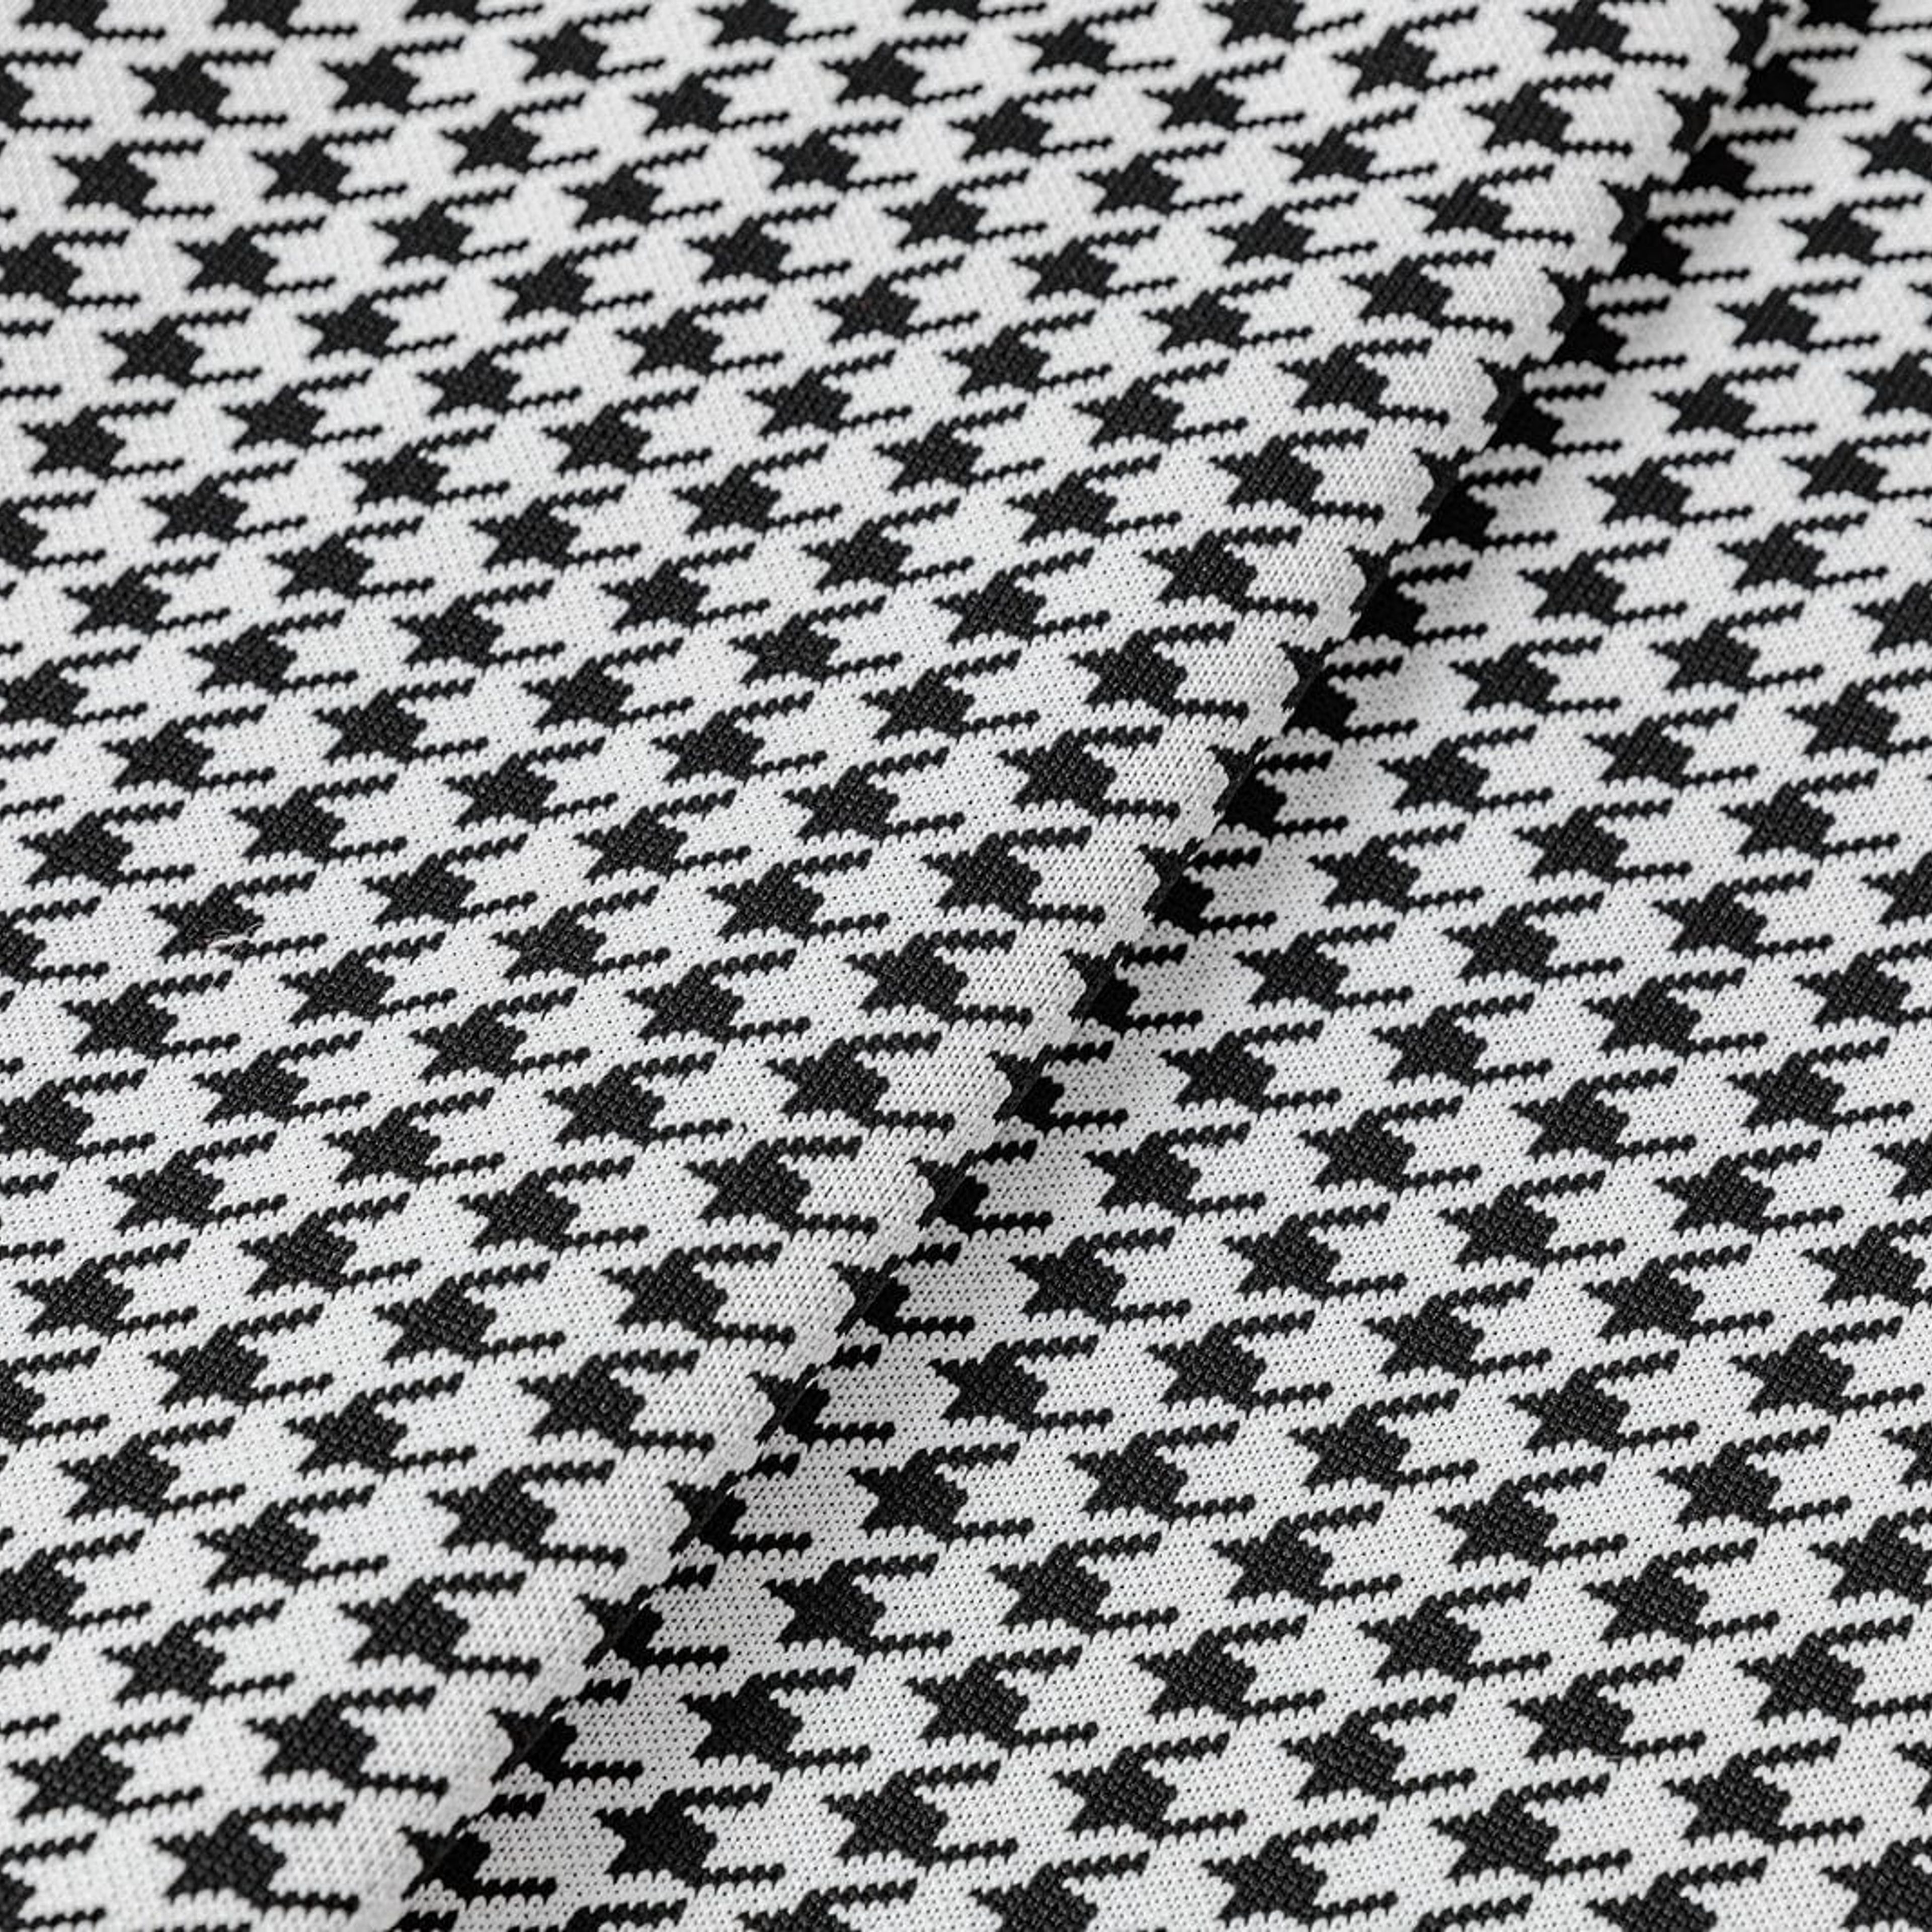 Houndstooth | Dog Bed or Bed Cover